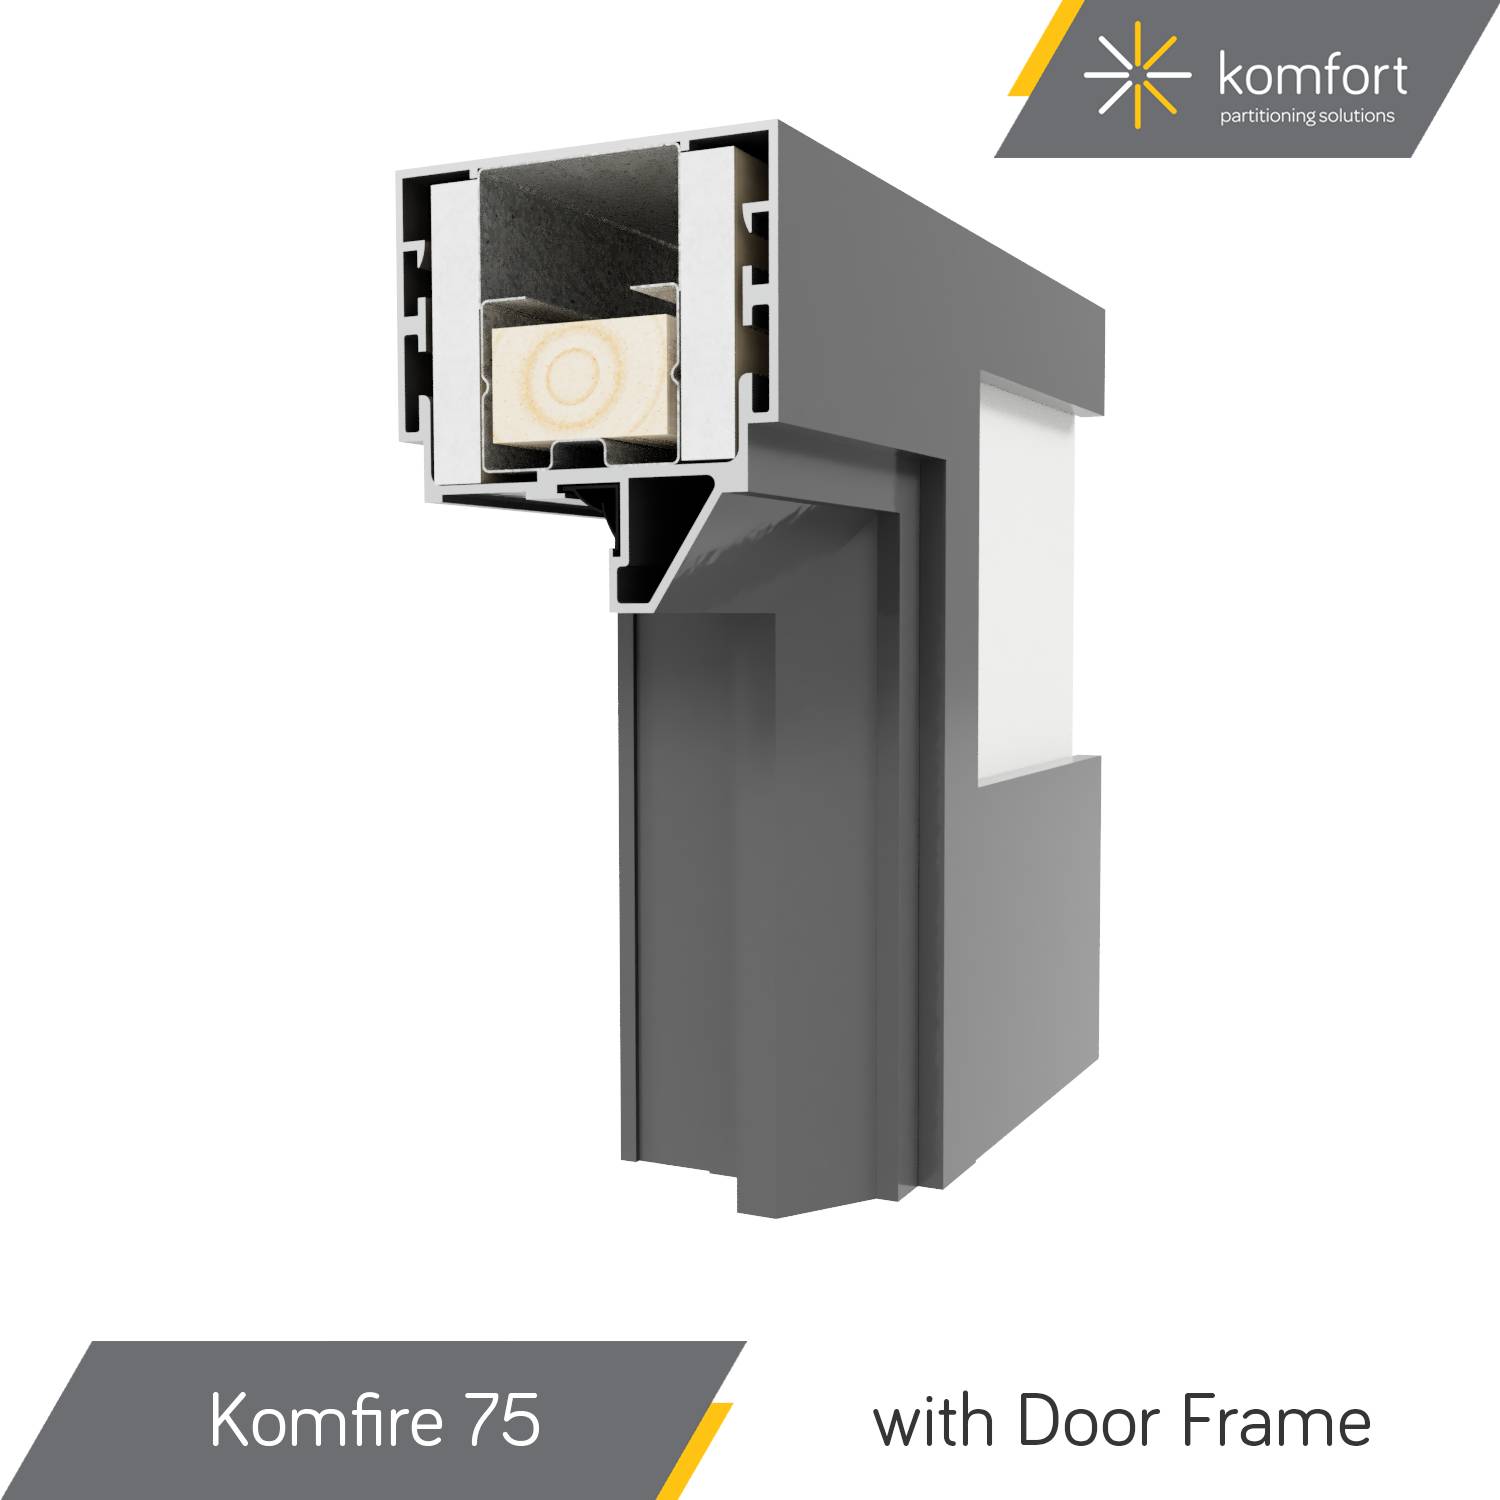 Komfort | Komfire 75 | Non-Fire Rated Solid & Glazed Partitioning